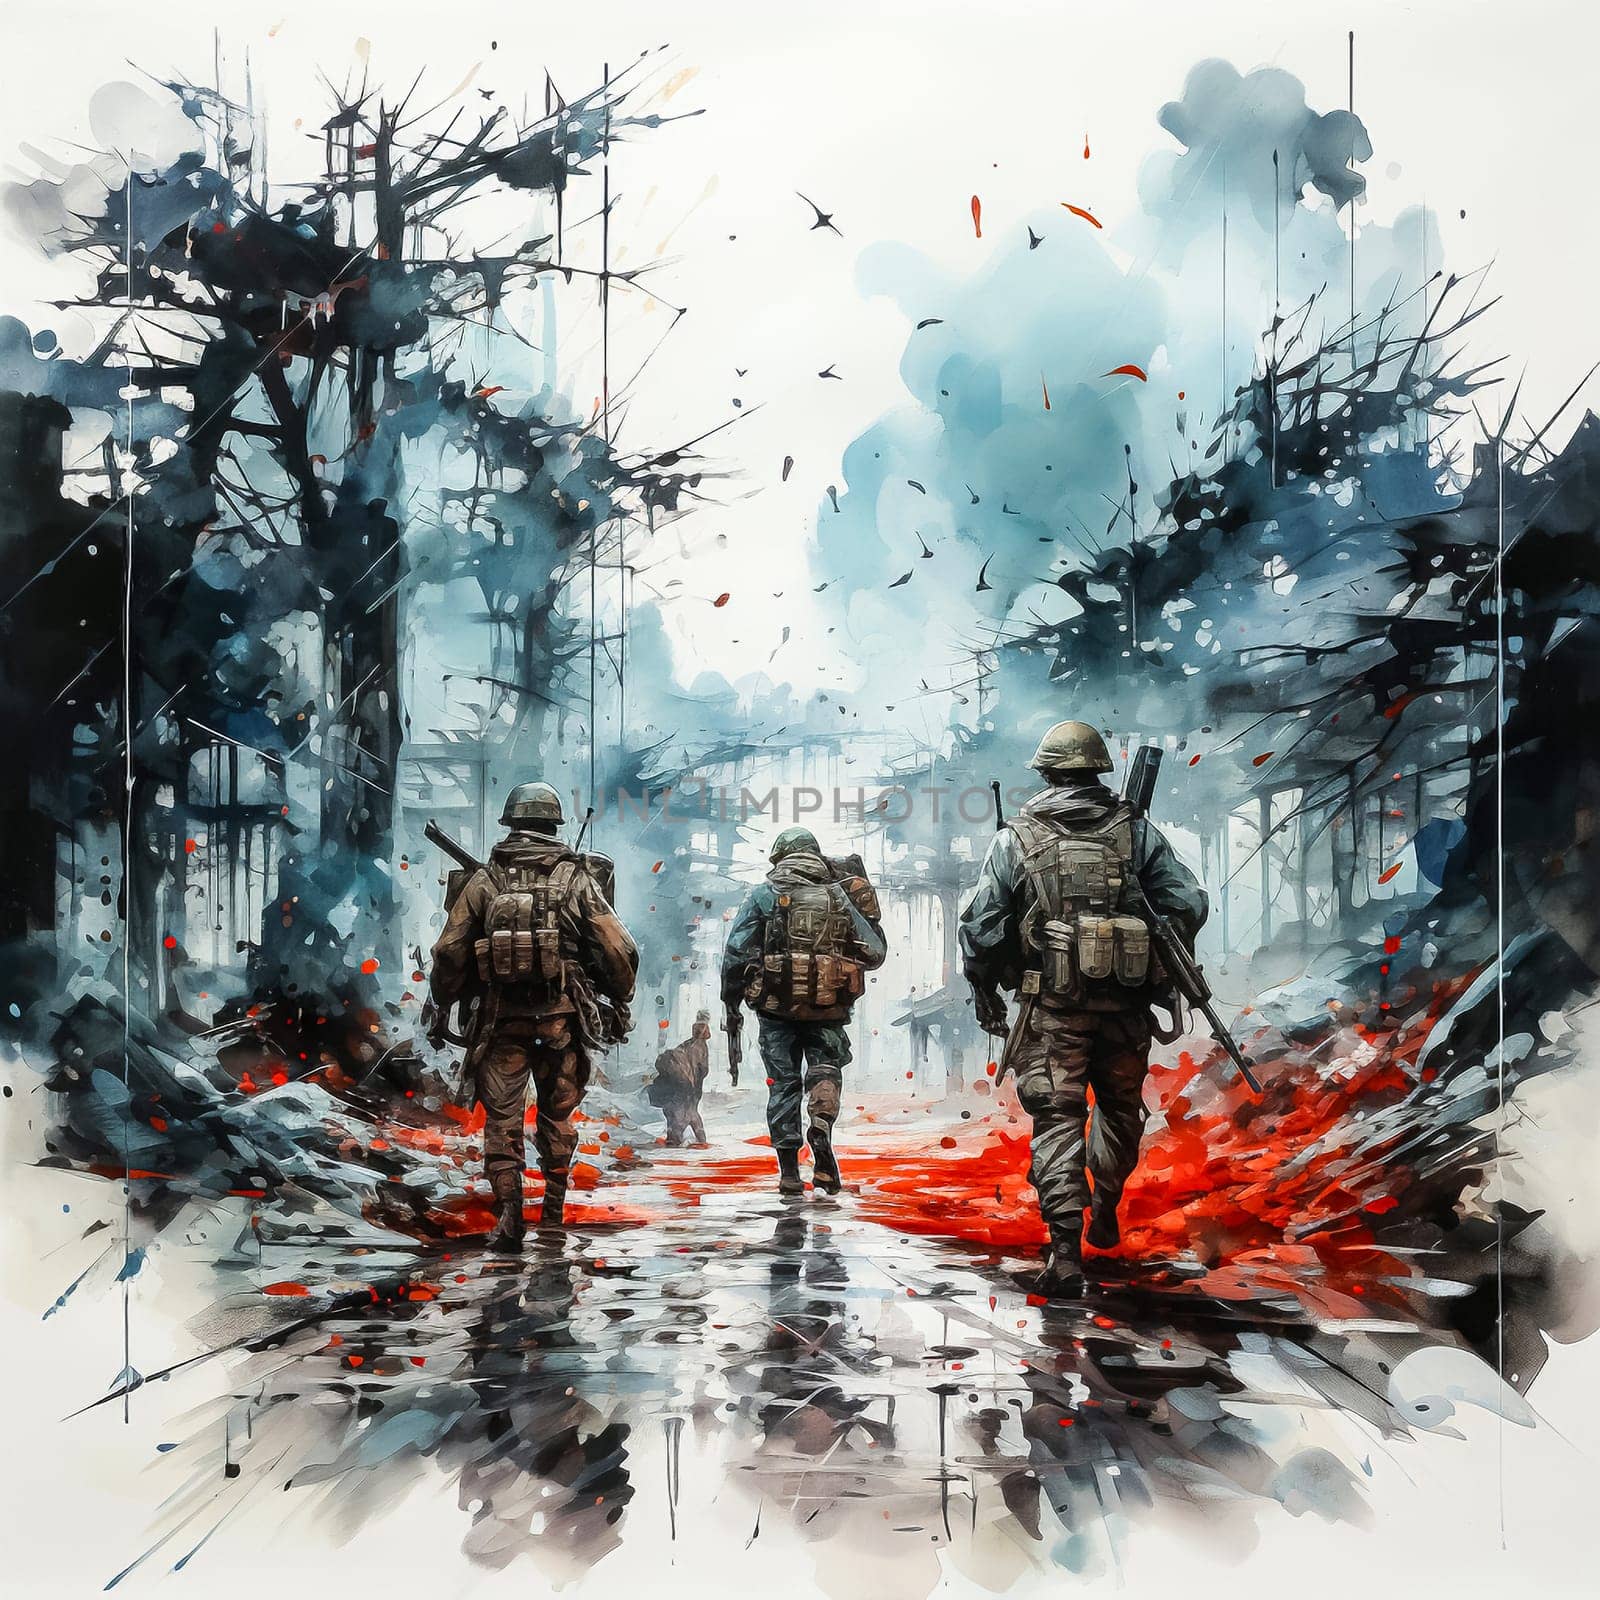 Soldiers amid red gray watercolor splashes powerful and evocative illustration.